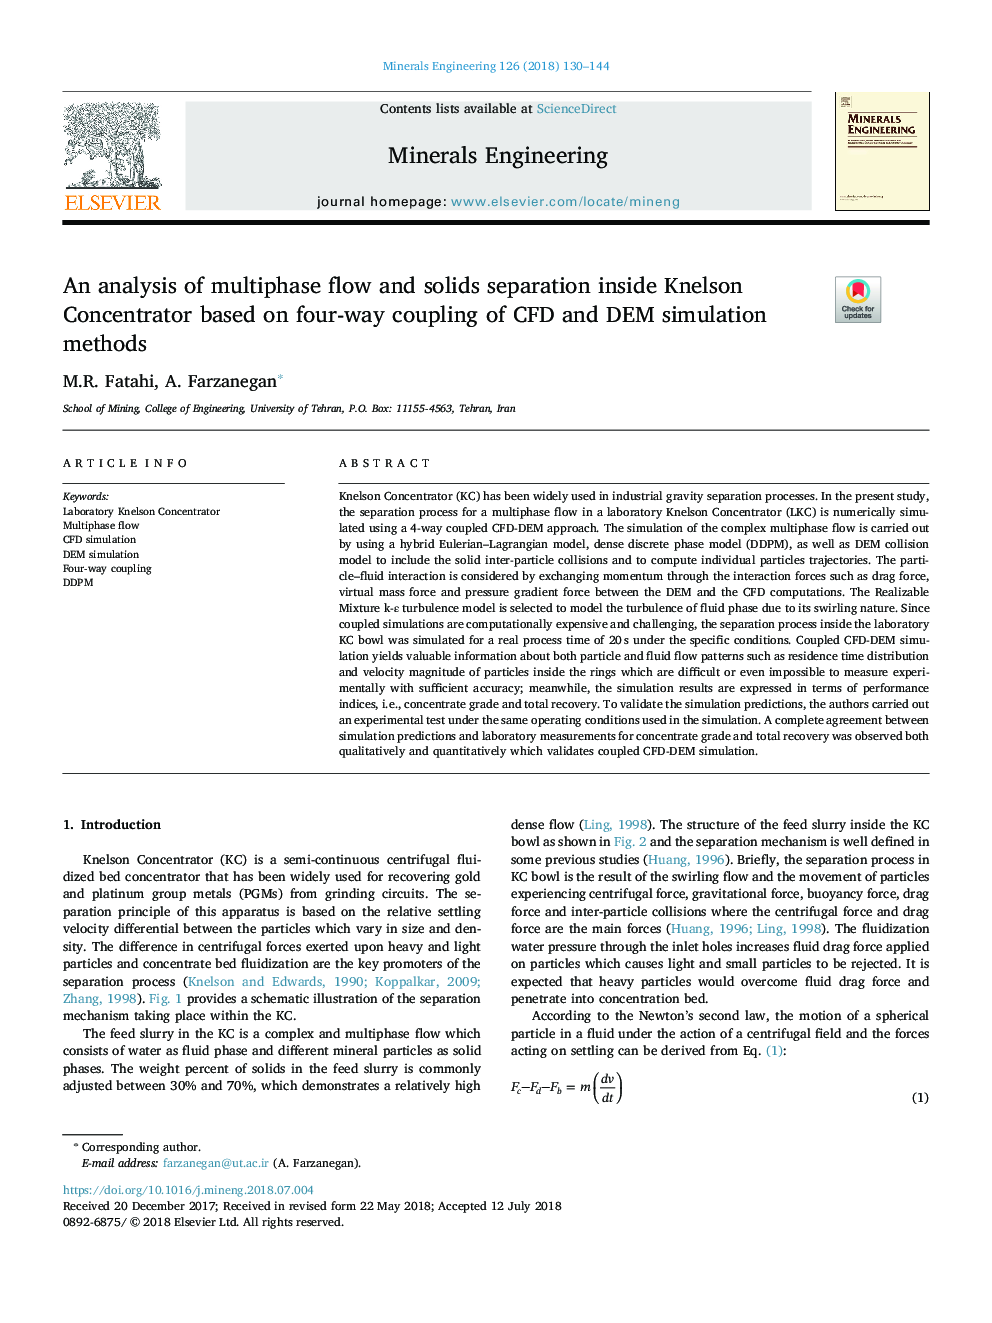 An analysis of multiphase flow and solids separation inside Knelson Concentrator based on four-way coupling of CFD and DEM simulation methods